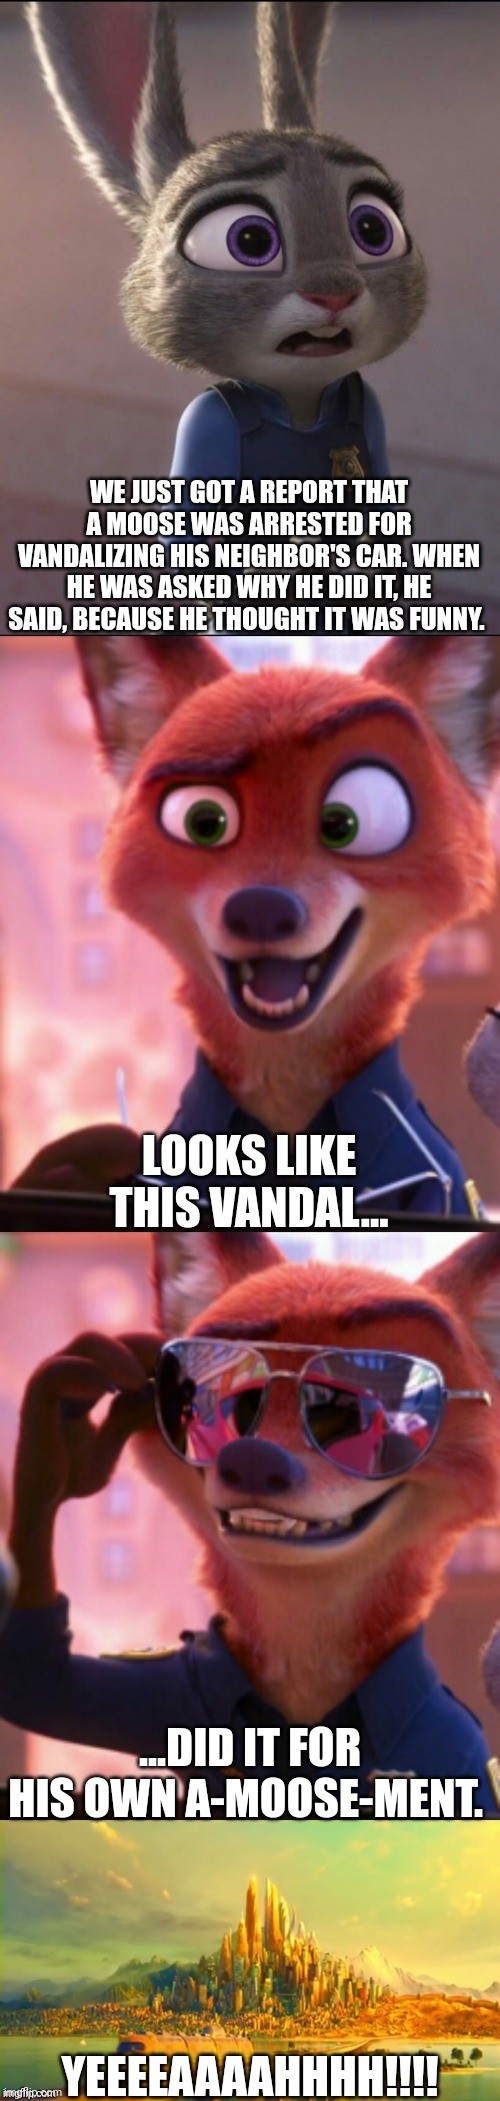 CSI: Zootopia 40 | WE JUST GOT A REPORT THAT A MOOSE WAS ARRESTED FOR VANDALIZING HIS NEIGHBOR'S CAR. WHEN HE WAS ASKED WHY HE DID IT, HE SAID, BECAUSE HE THOUGHT IT WAS FUNNY. LOOKS LIKE THIS VANDAL... ...DID IT FOR HIS OWN A-MOOSE-MENT. YEEEEAAAAHHHH!!!! | image tagged in csi zootopia,zootopia,judy hopps,nick wilde,parody,funny | made w/ Imgflip meme maker